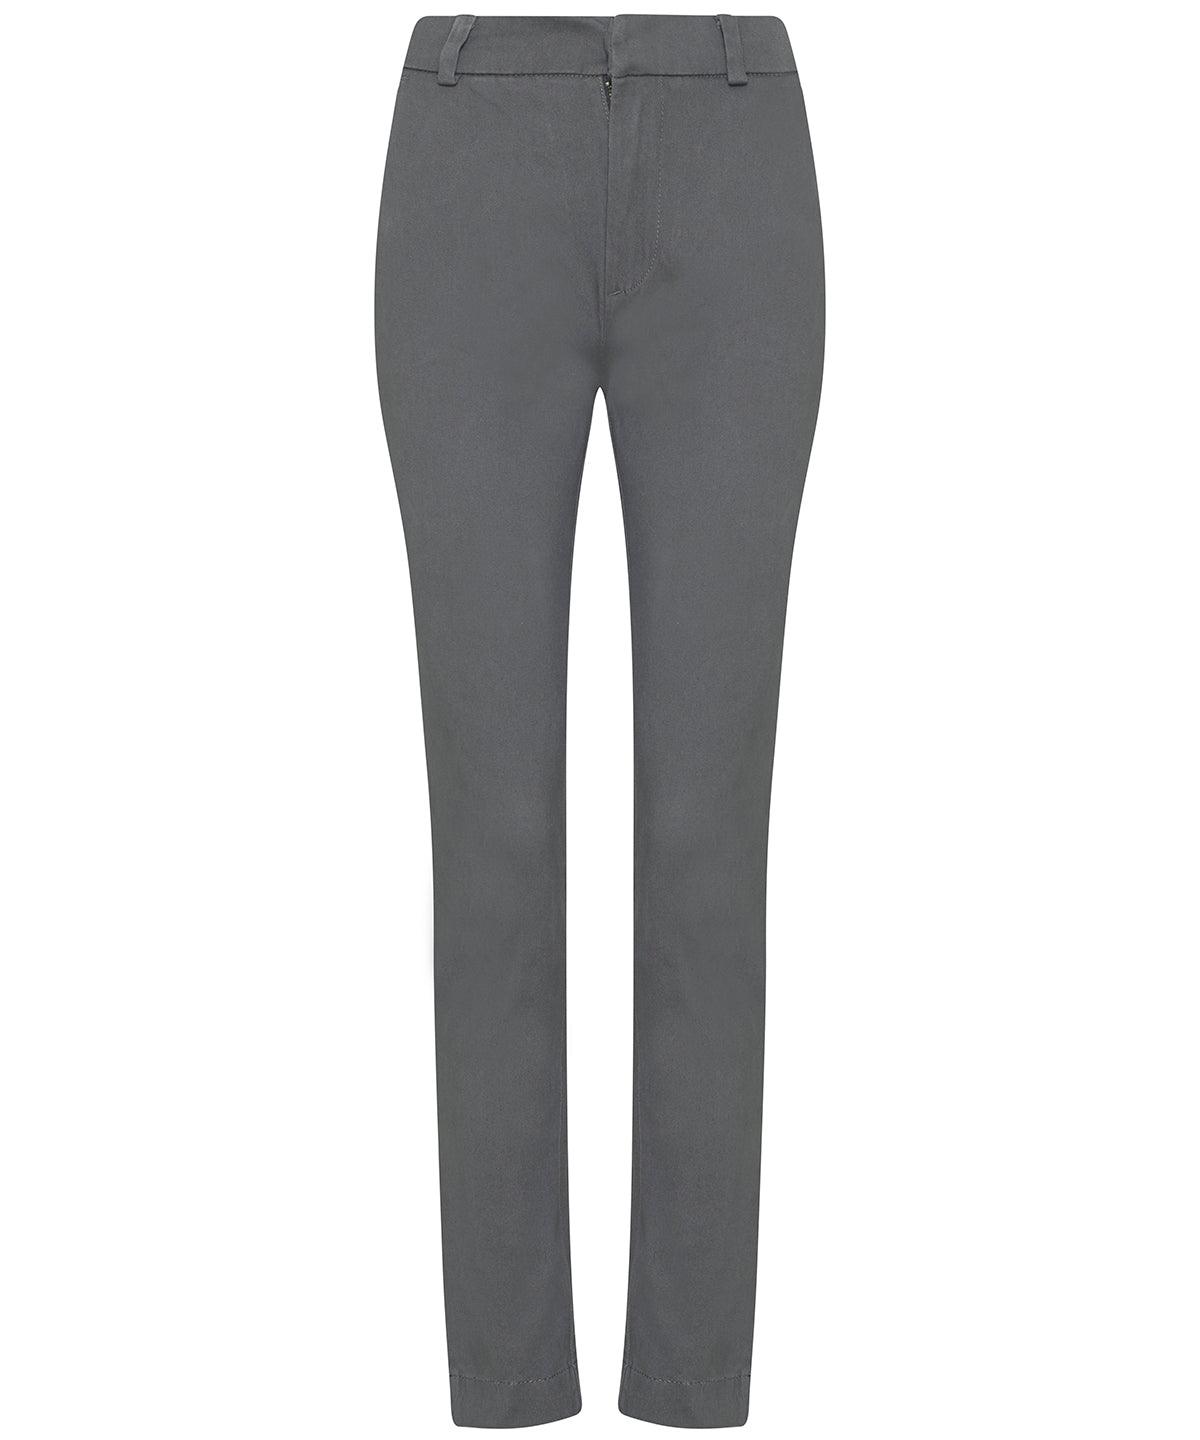 Slate - Women's Lily slim chinos Trousers AWDis So Denim Must Haves, Plus Sizes, Rebrandable, Trousers & Shorts, Women's Fashion Schoolwear Centres